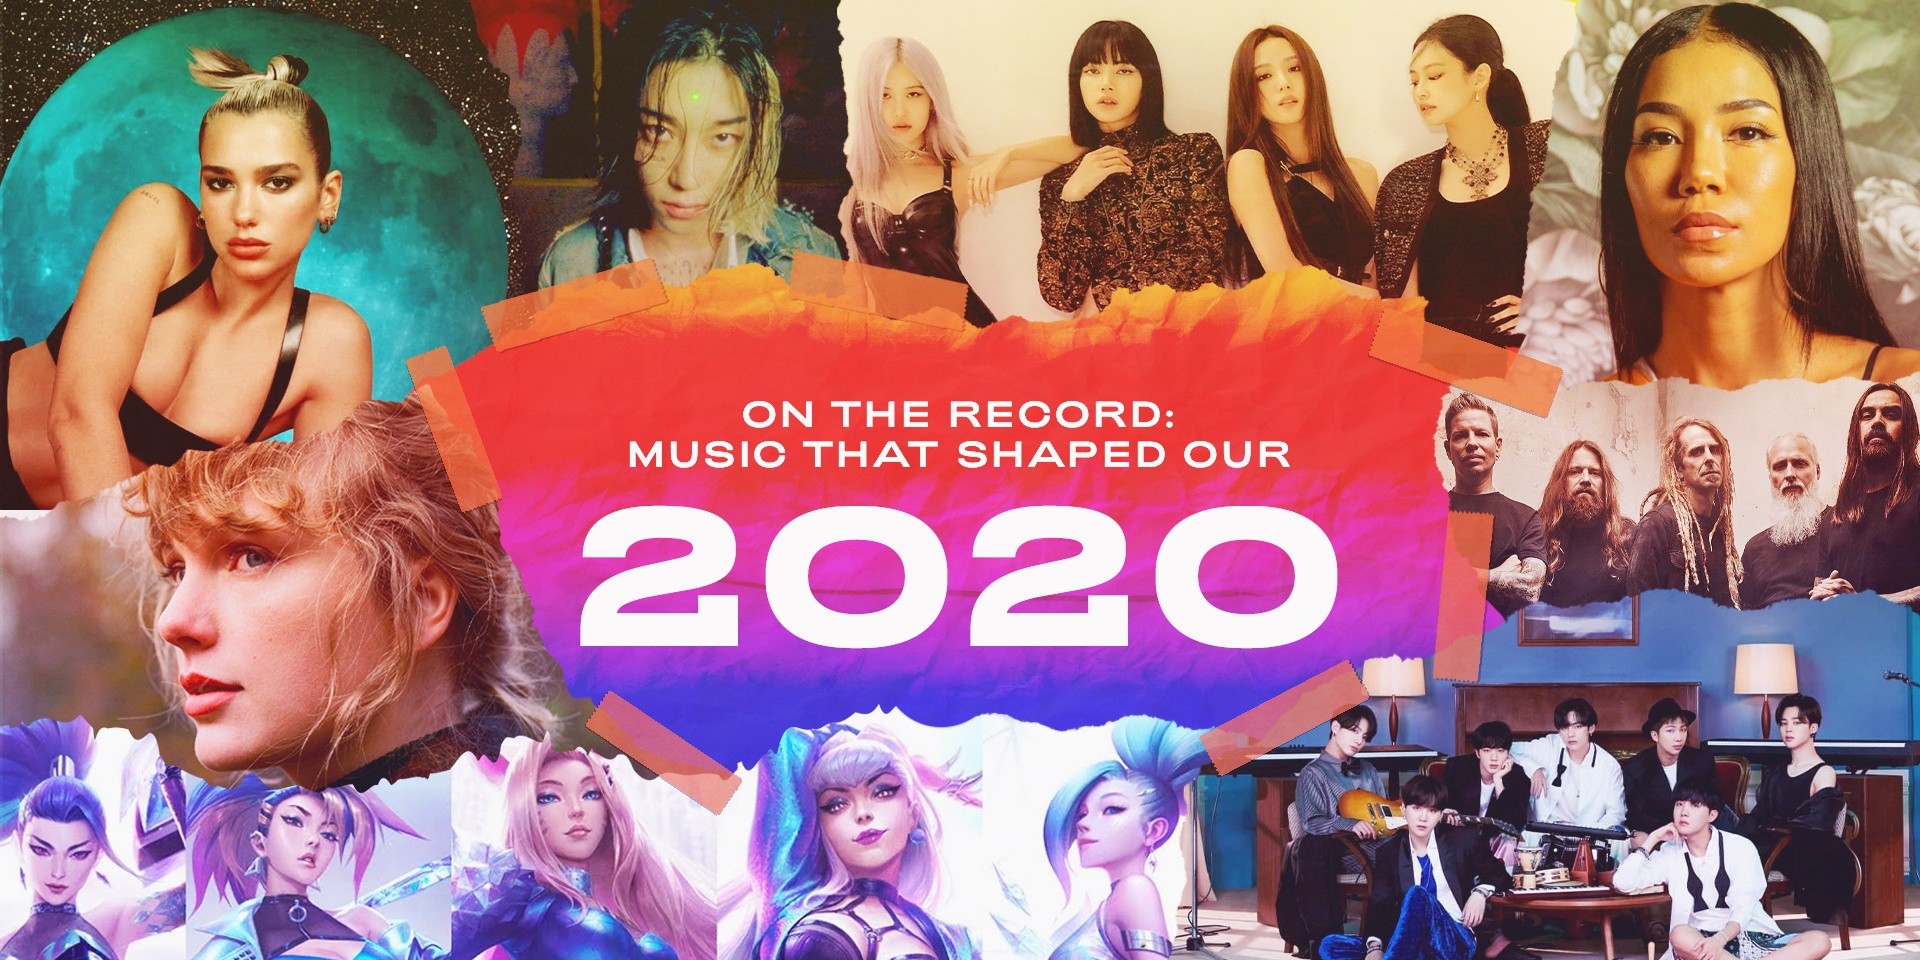 On The Record: The music that shaped our 2020